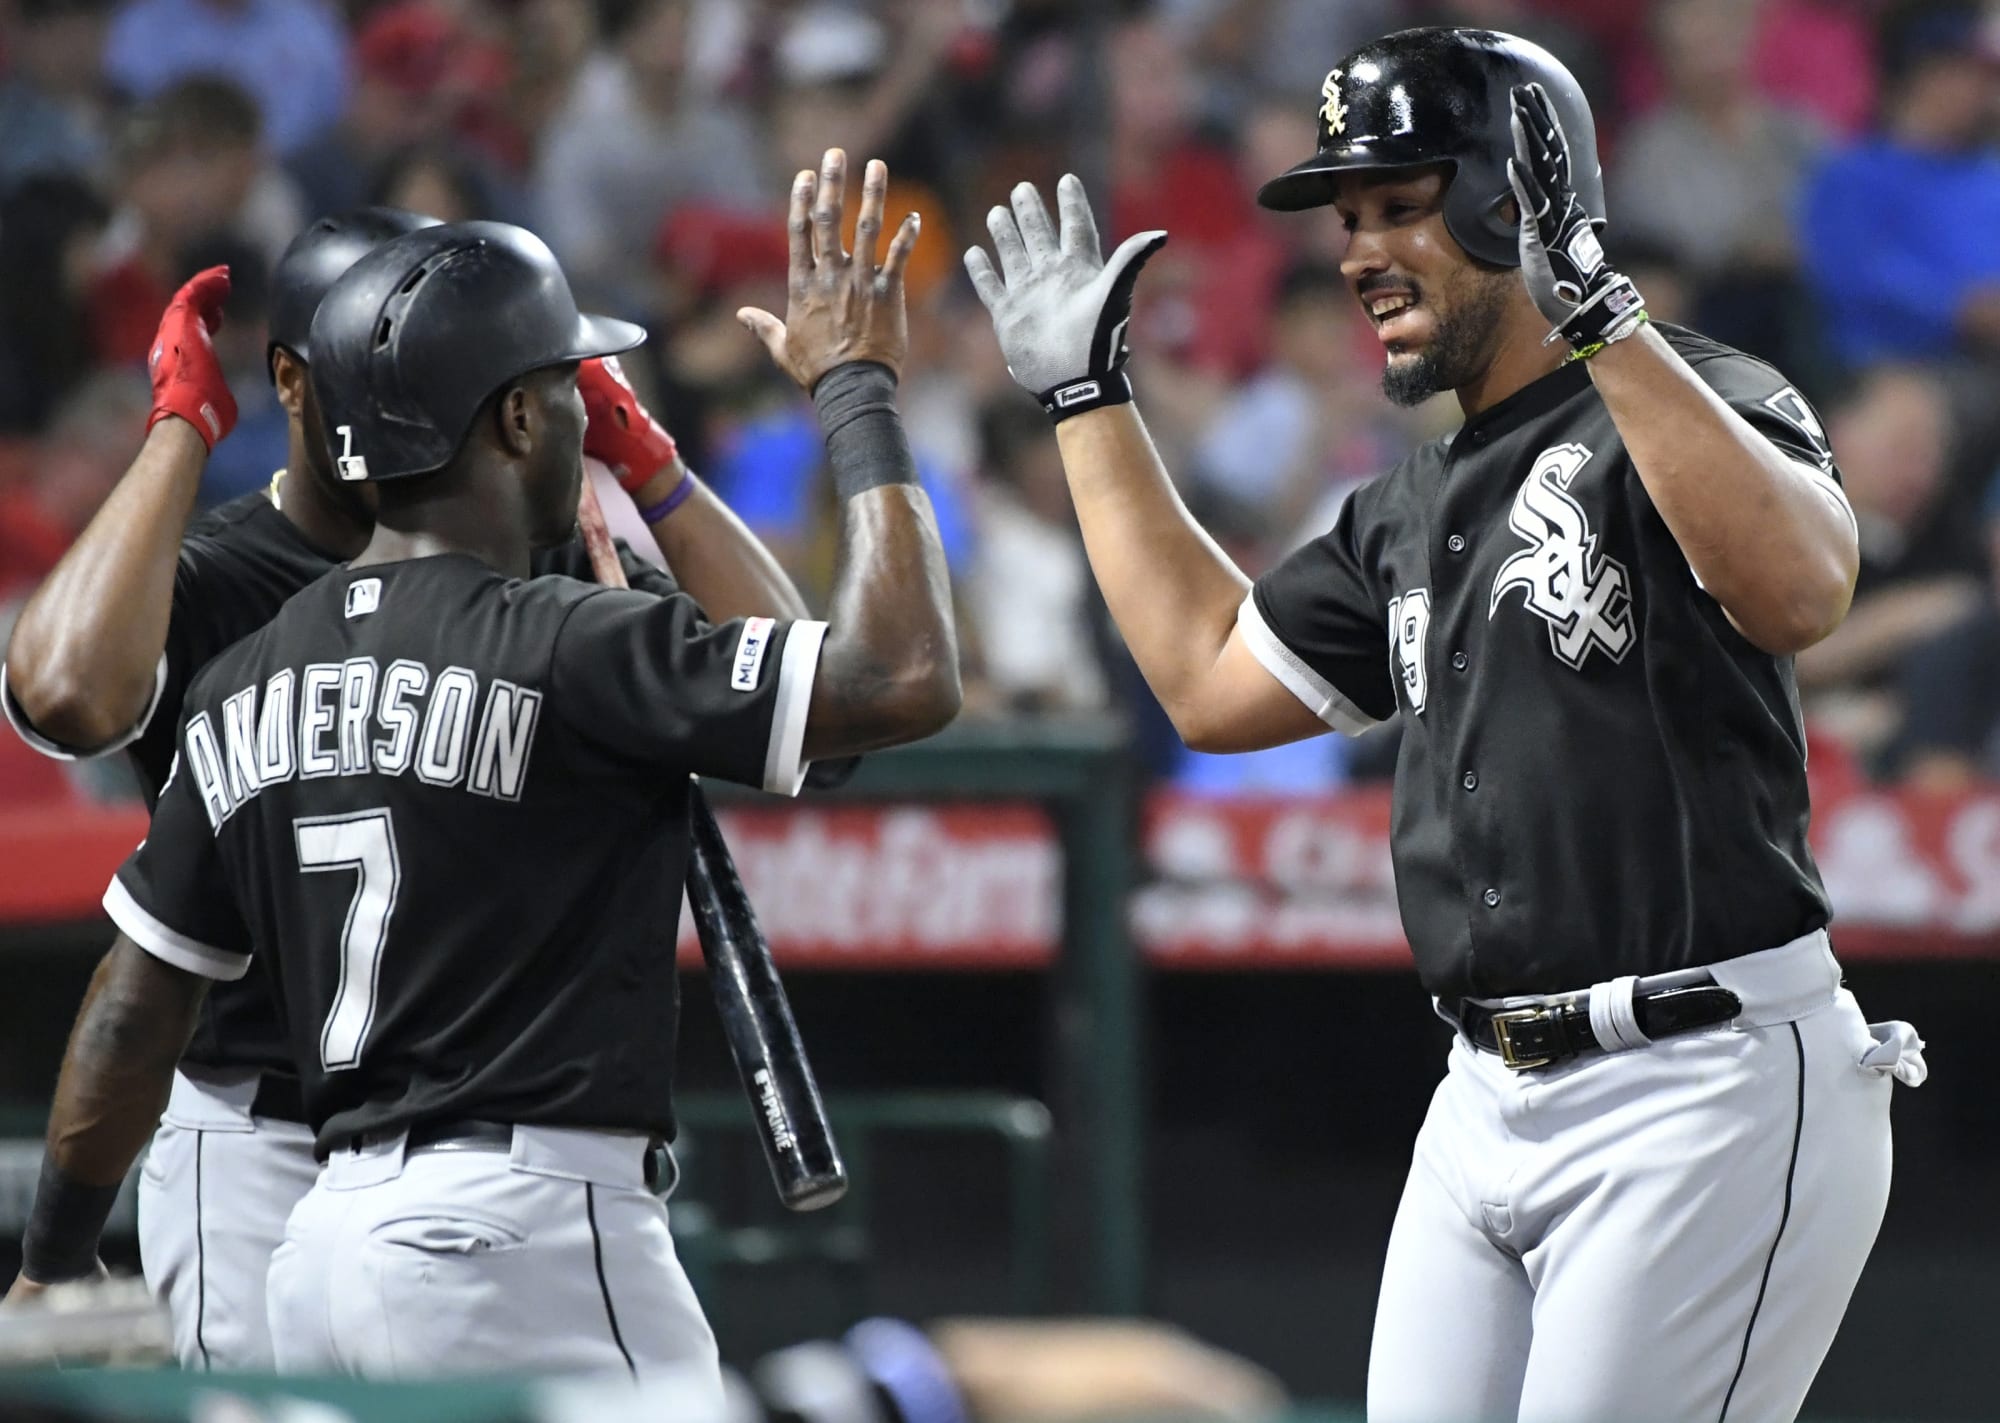 White Sox will prove they own Chicago in same division this season